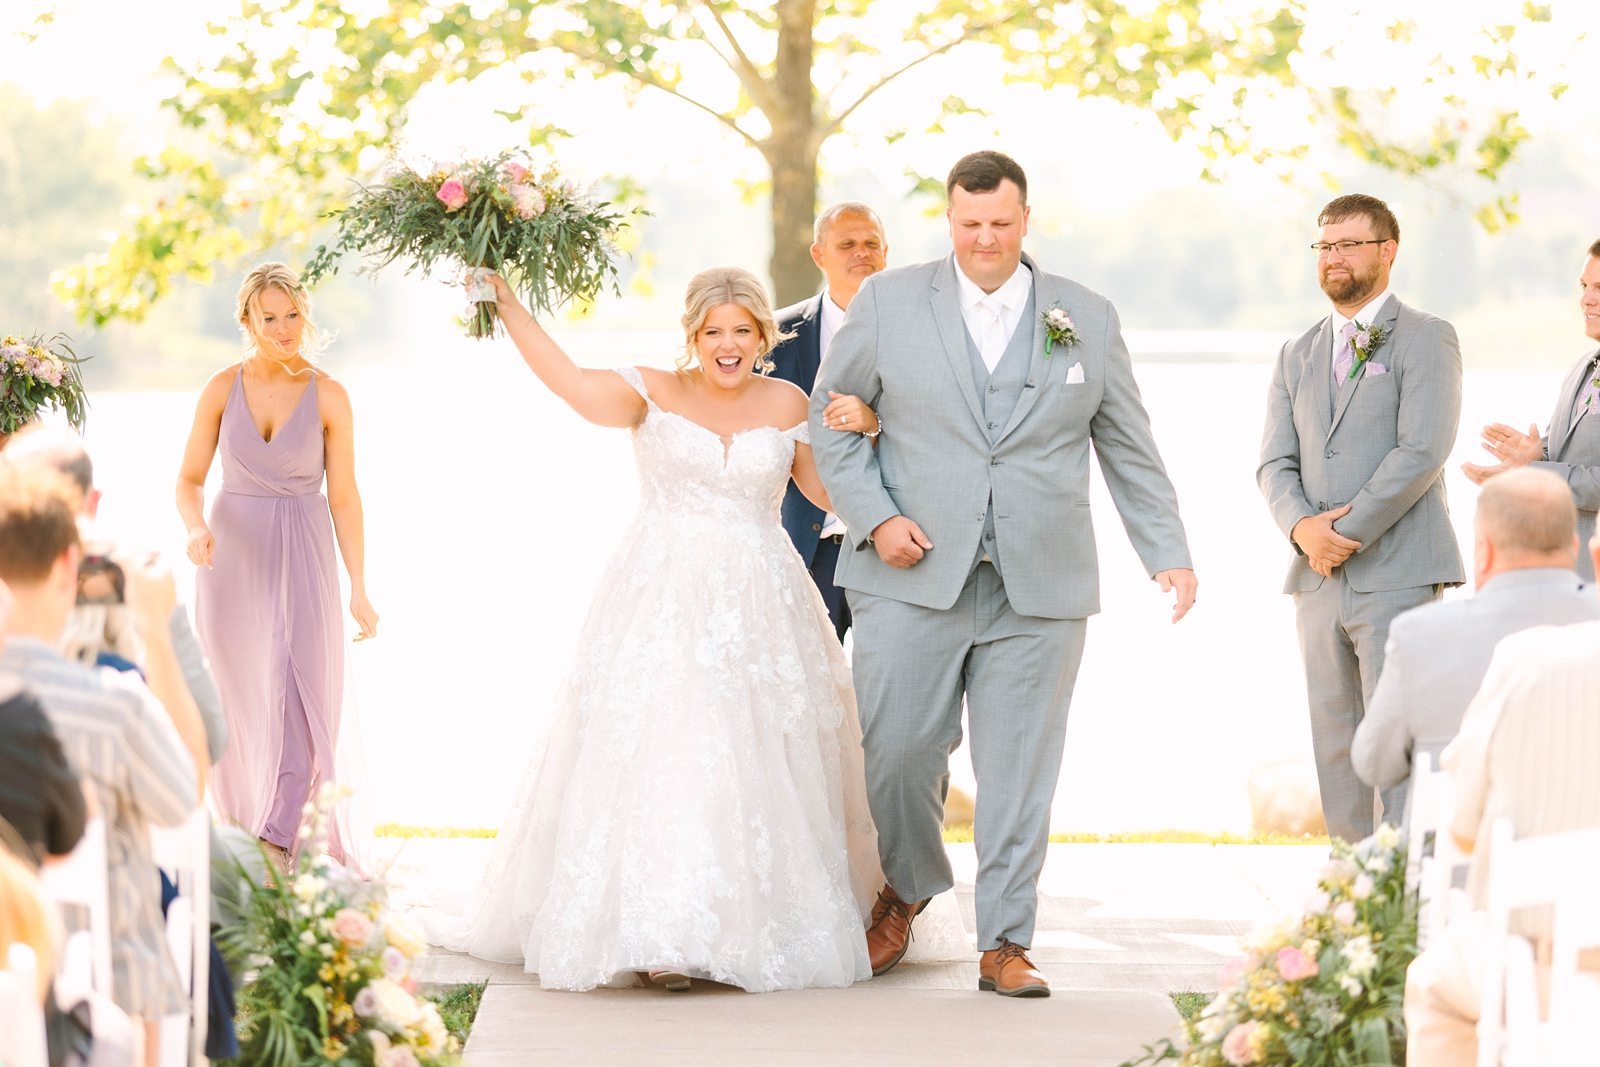 A Sunny Summer Wedding at Friedman Park in Newburgh Indiana | Paige and Dylan | Bret and Brandie Photography136.jpg